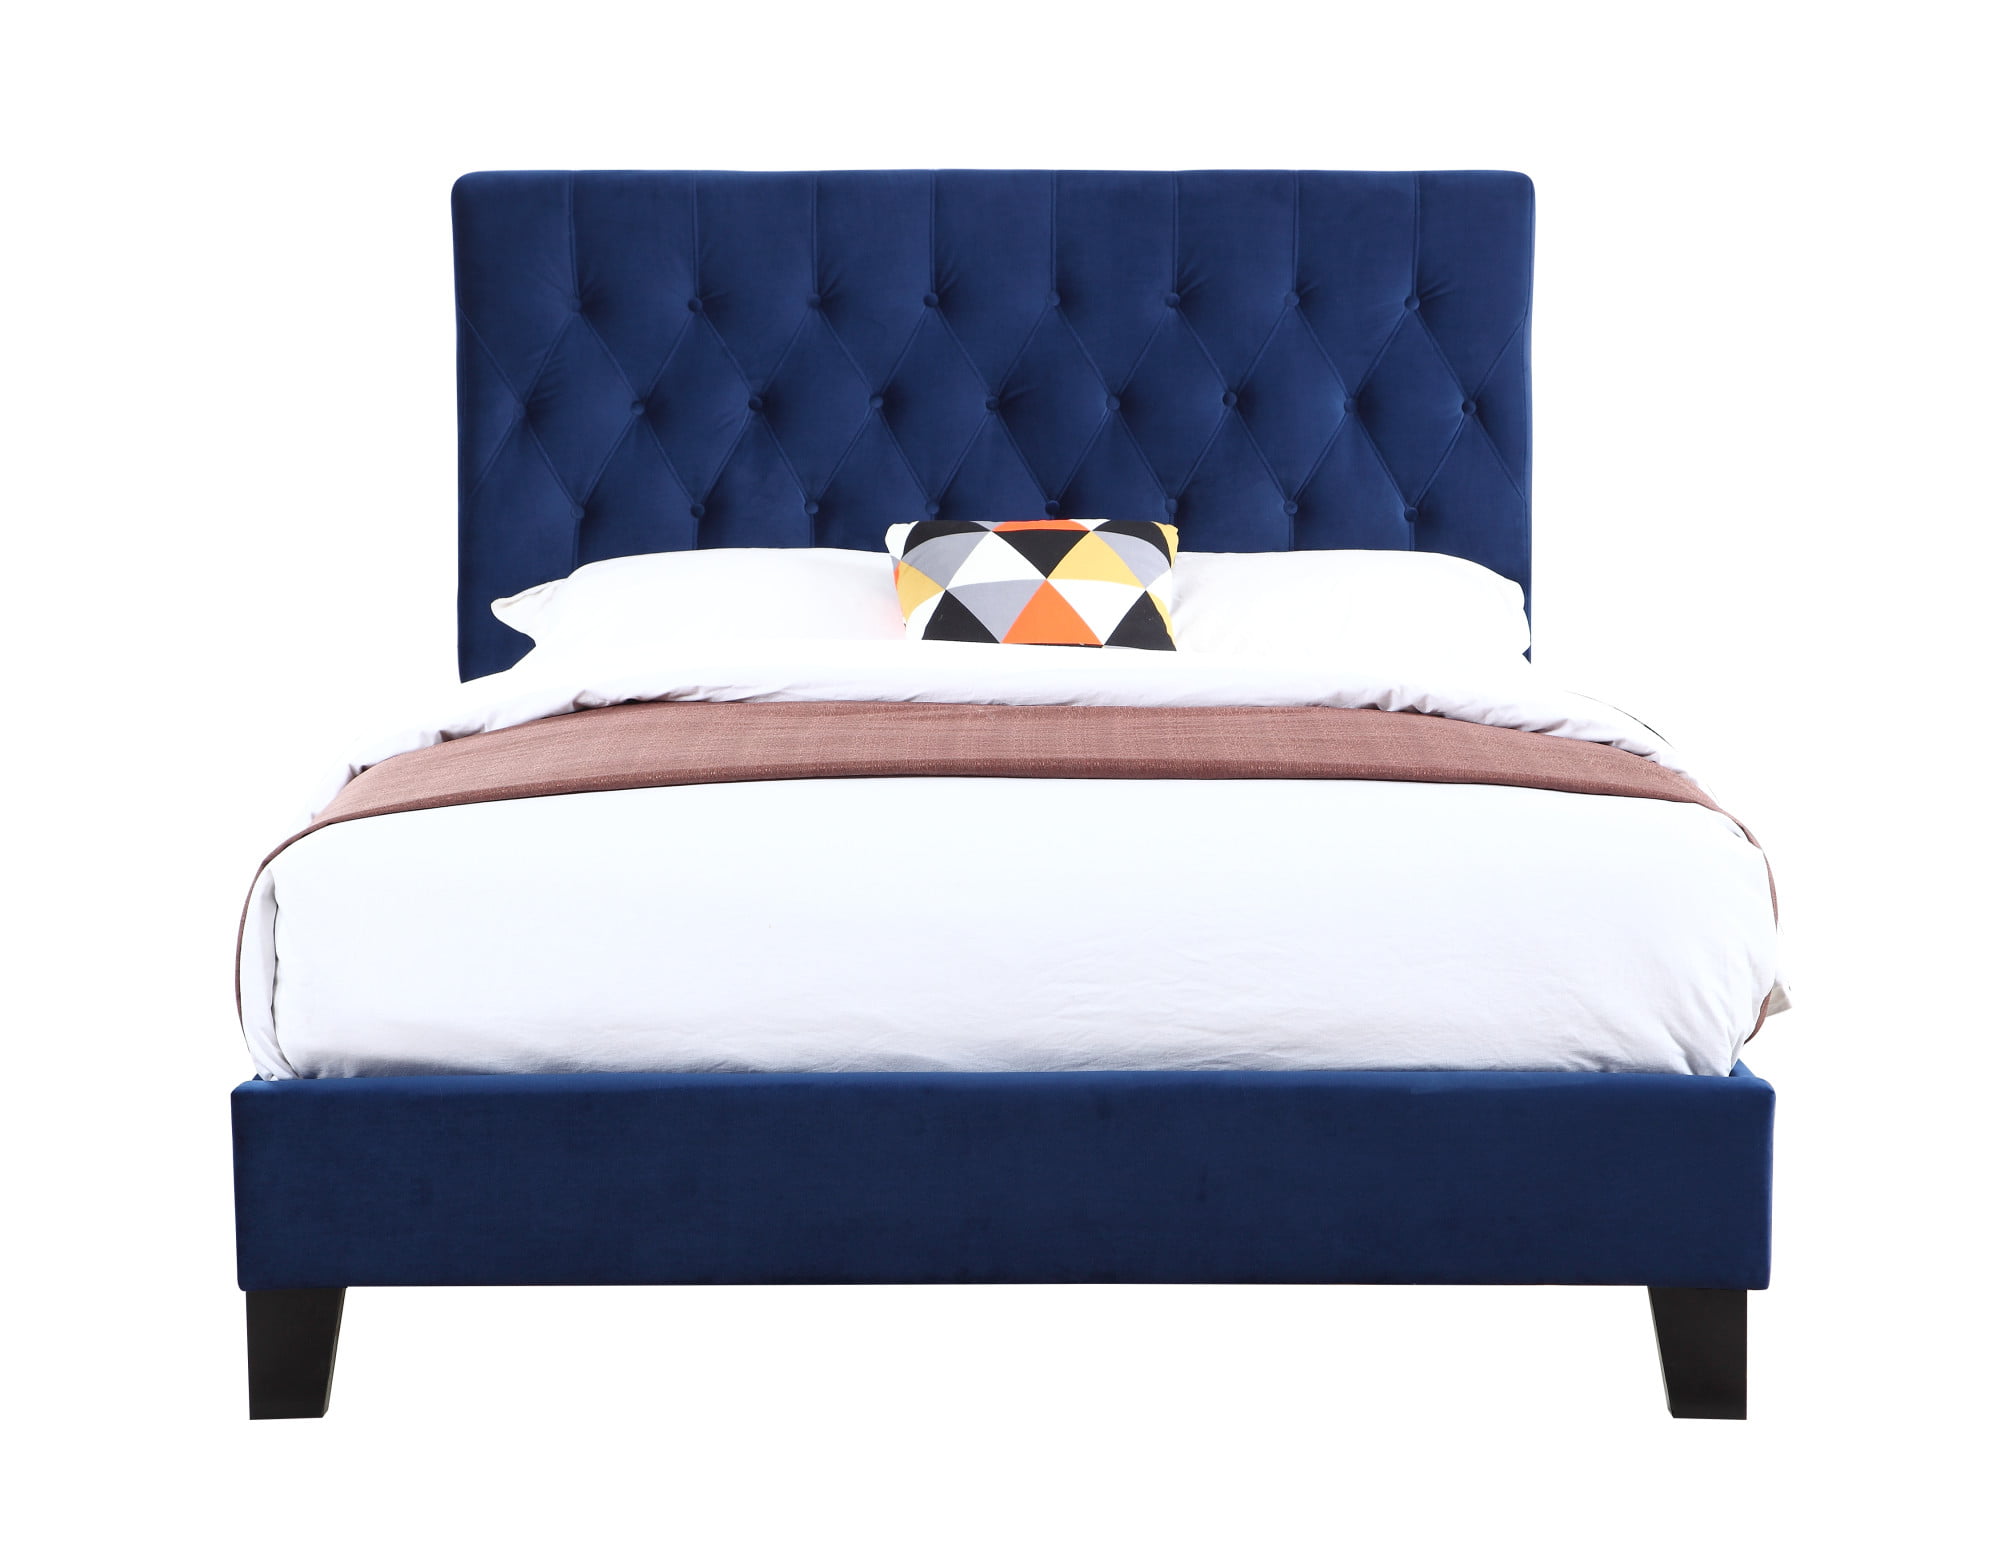 Details about   Brookside Twin XL Headboard Bed Frame Mounted Pre-Assembled Navy Blue 